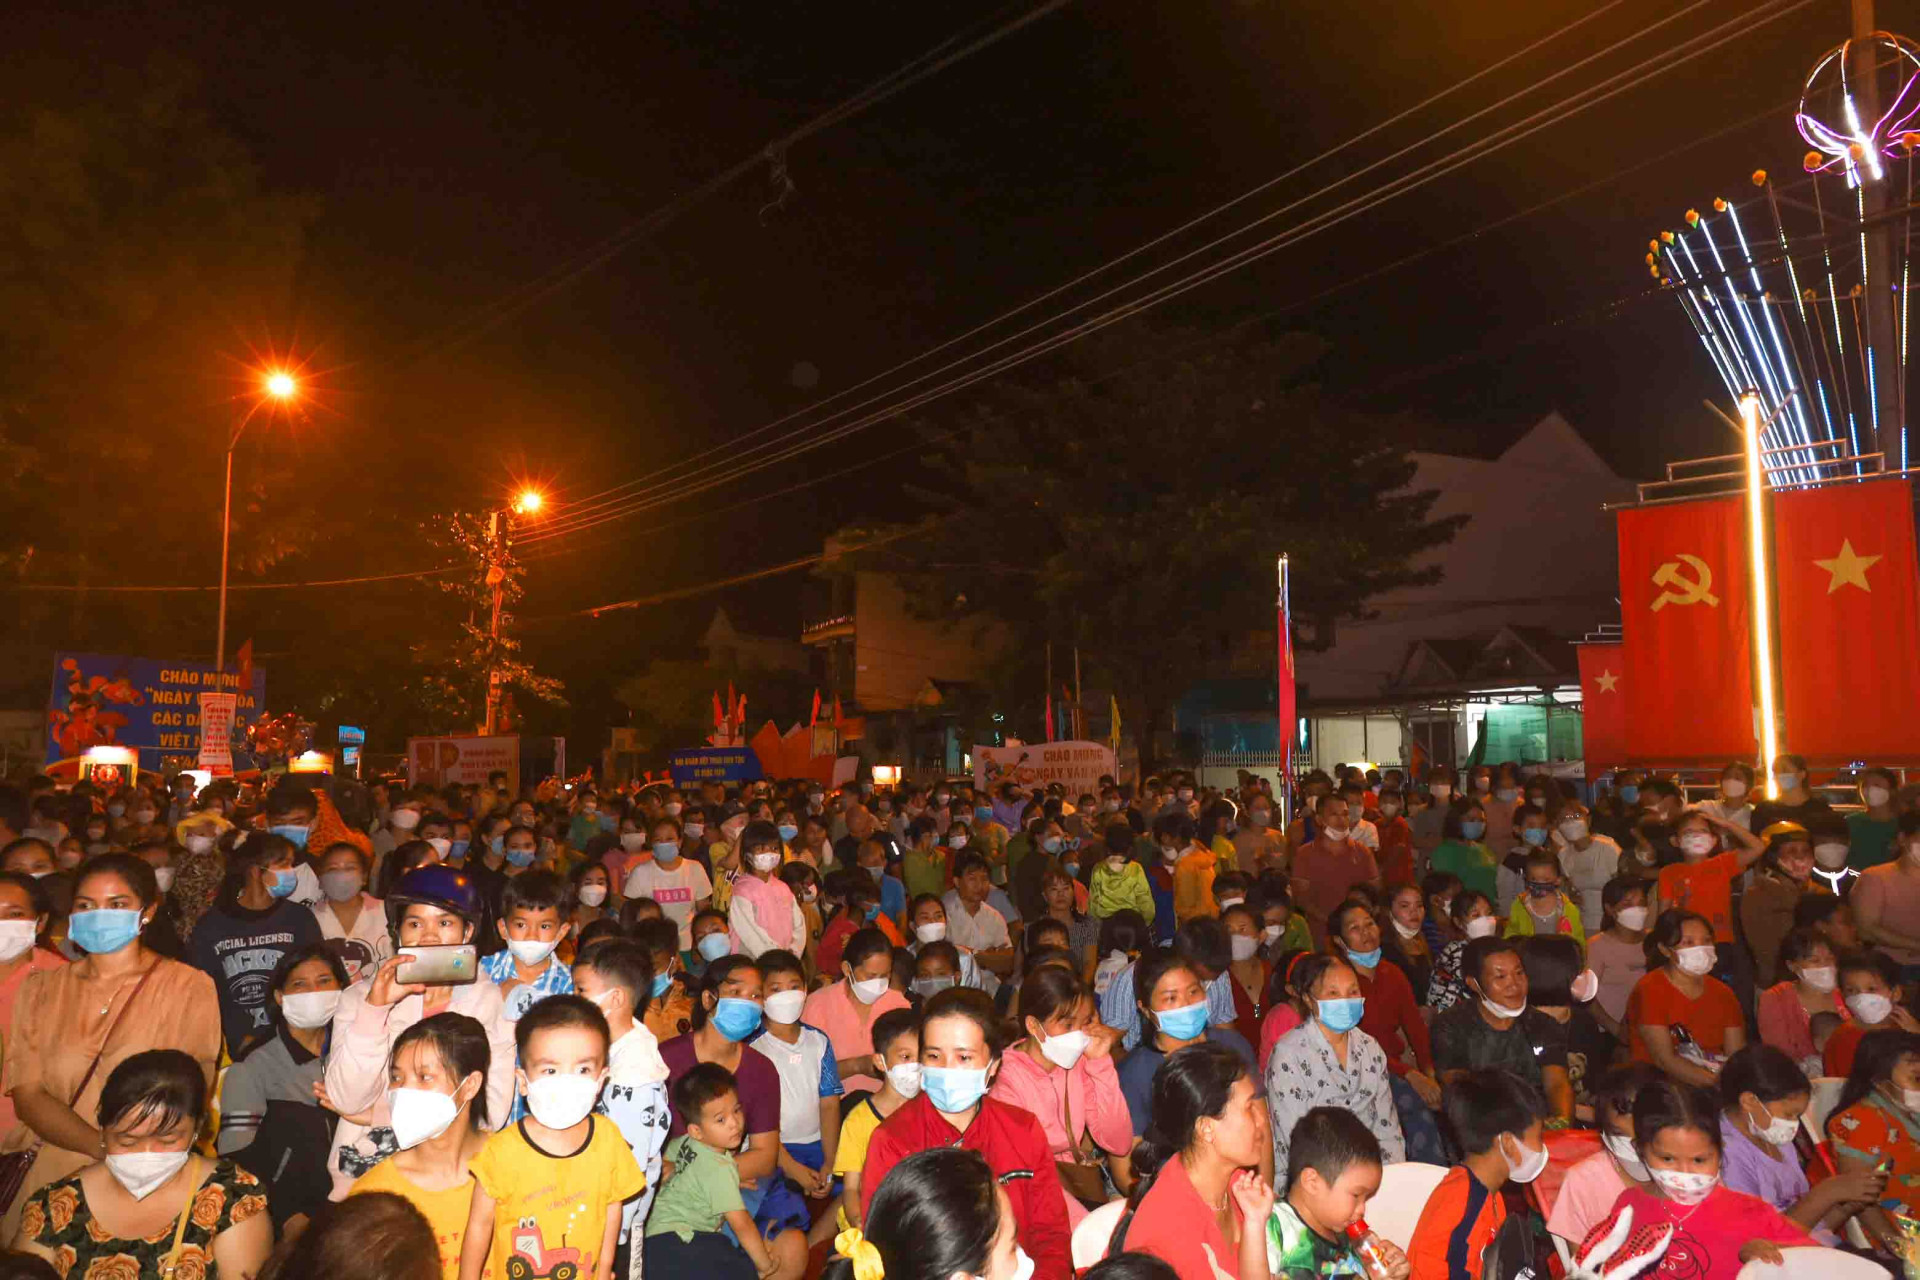 A lot of people in Khanh Vinh District seeing opening ceremony of Khanh Hoa’s 2022 Vietnam Ethnic Groups’ Cultural Day 